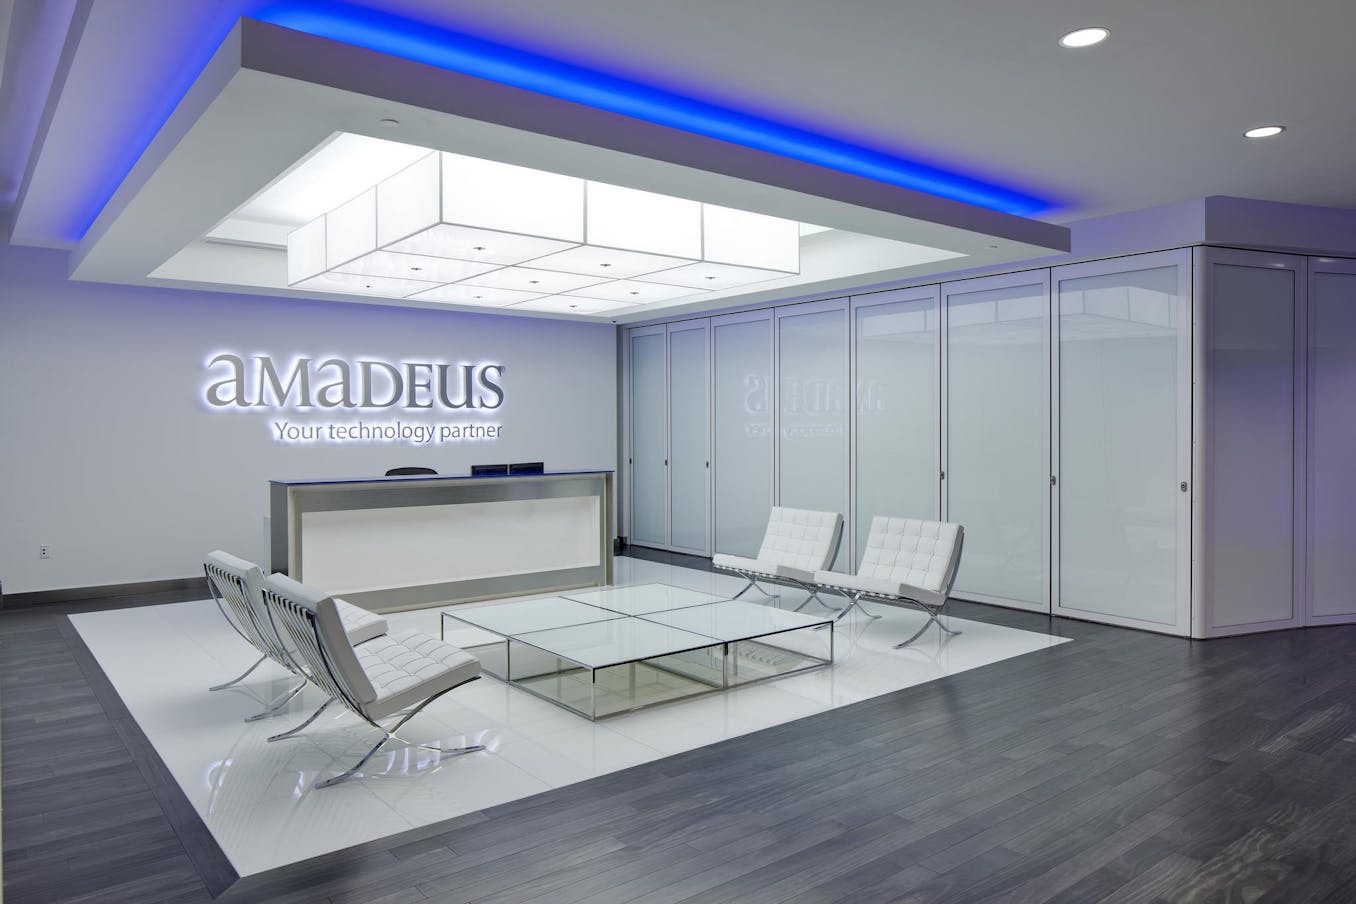 Commercial office space at Amadeus in Florida - closed frosted sliding glass walls